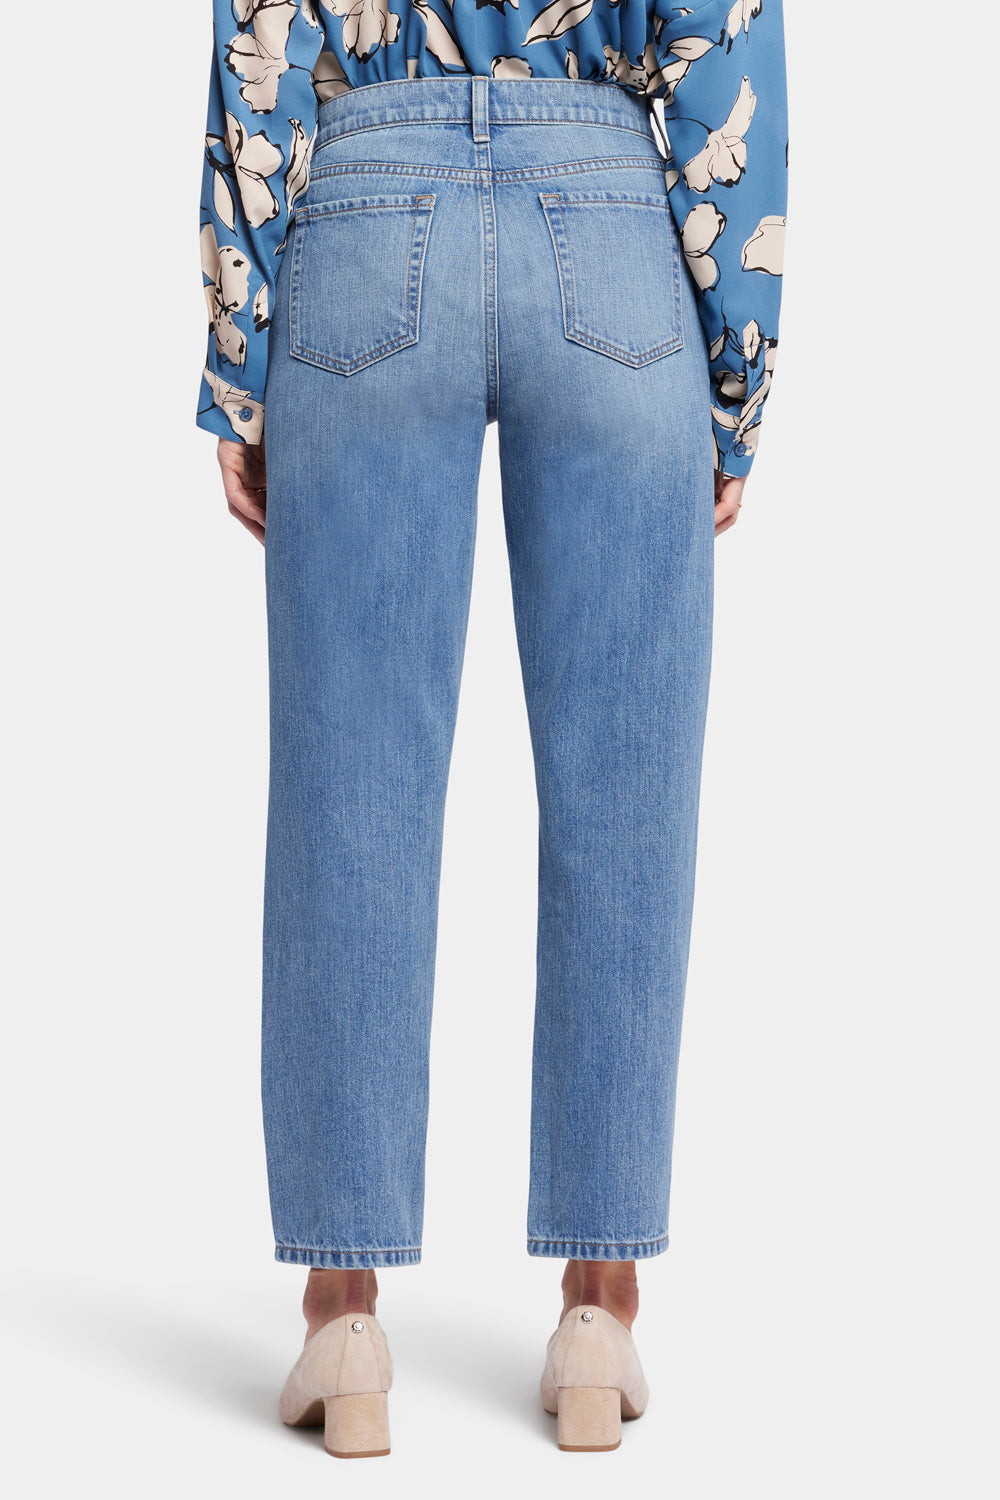 NYDJ Charlotte Relaxed Jeans In Rigid Denim With Super High Rise - Piccadilly